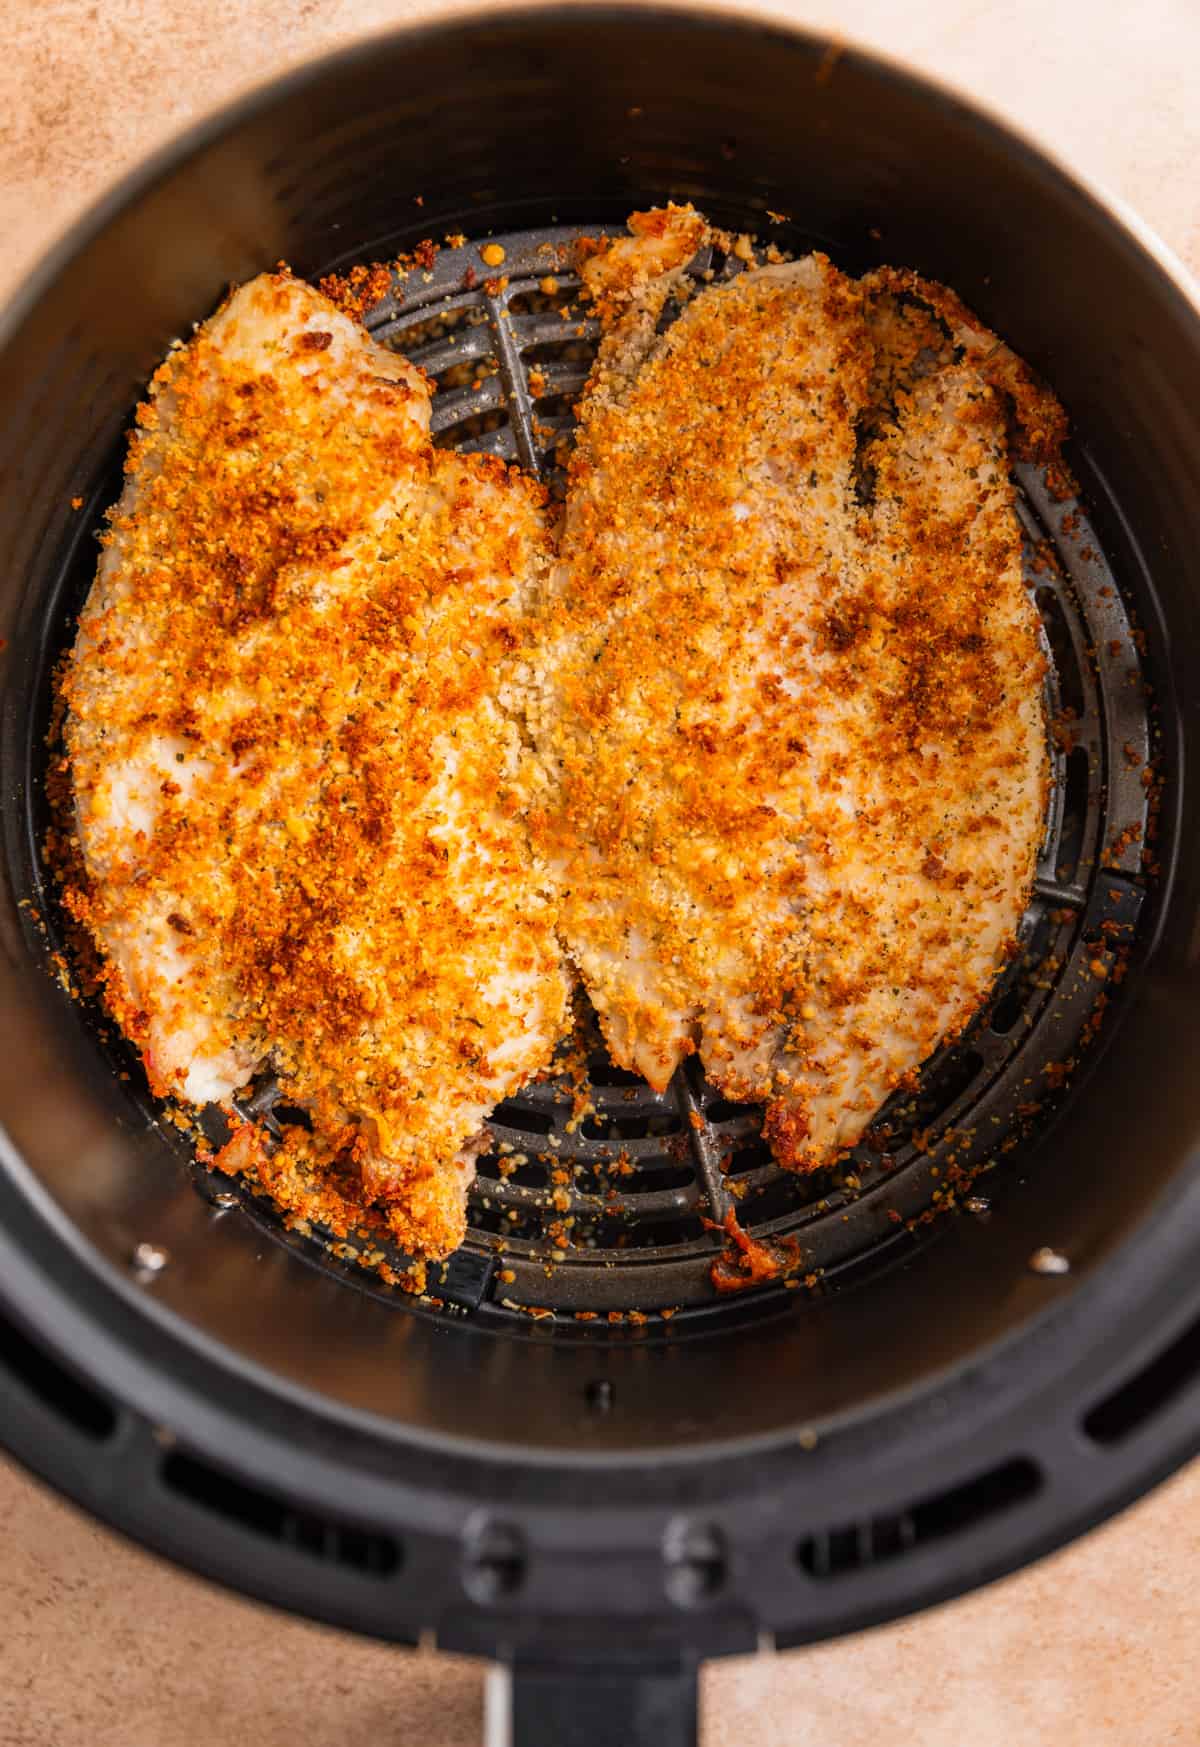 Parmesan crusted tilapia in air fryer basket after cooking.